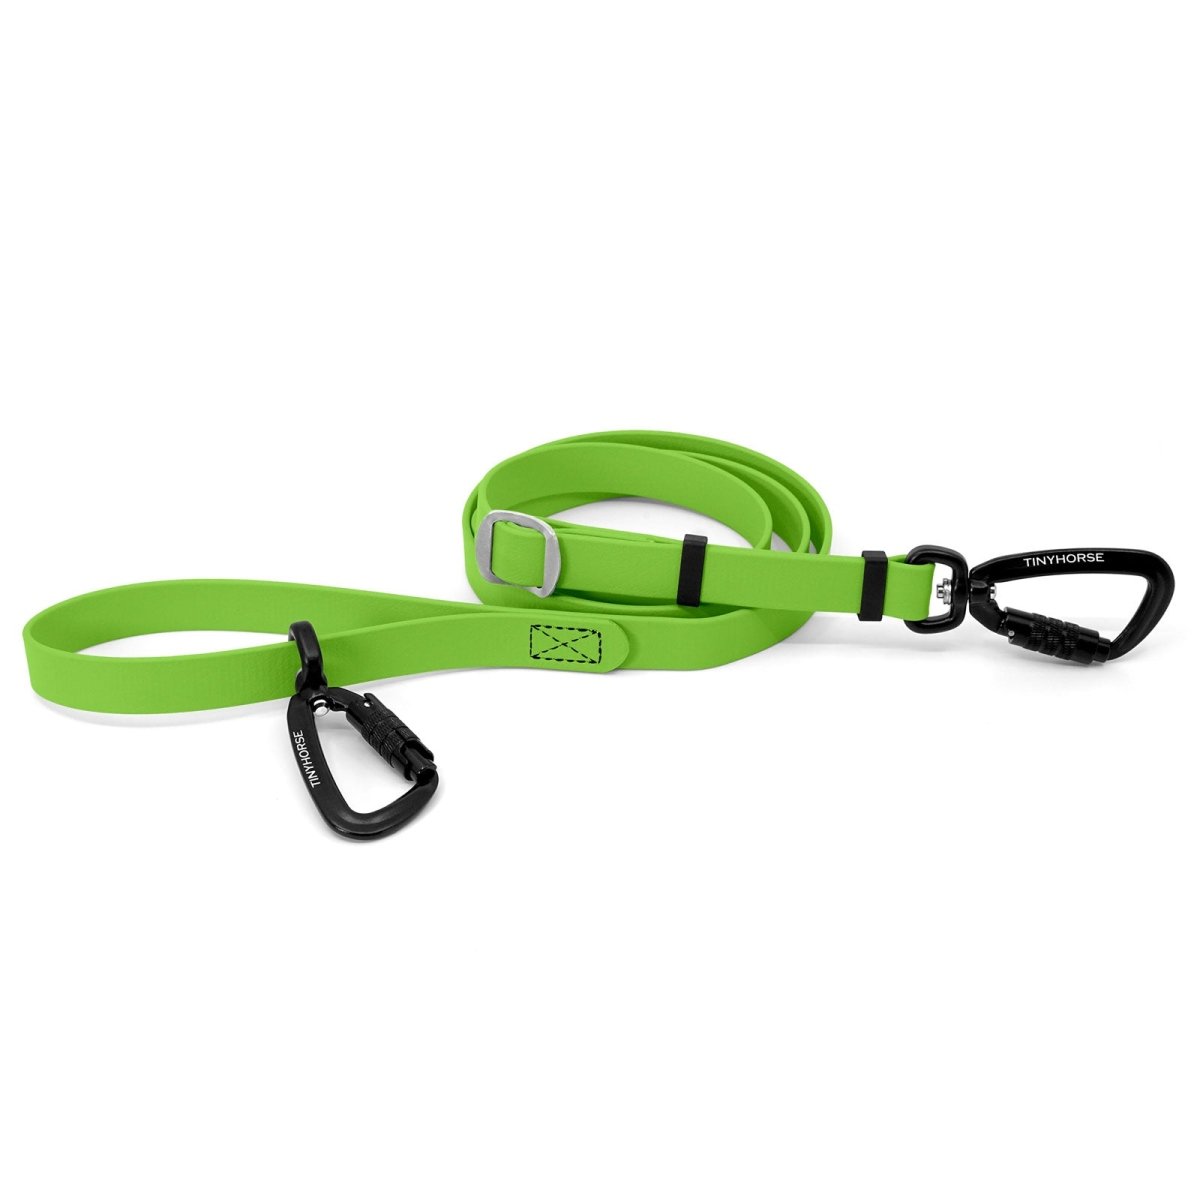 An adjustable key lime-coloured Lead-All Pro Extra made of BioThane with 2 auto-locking carabiners